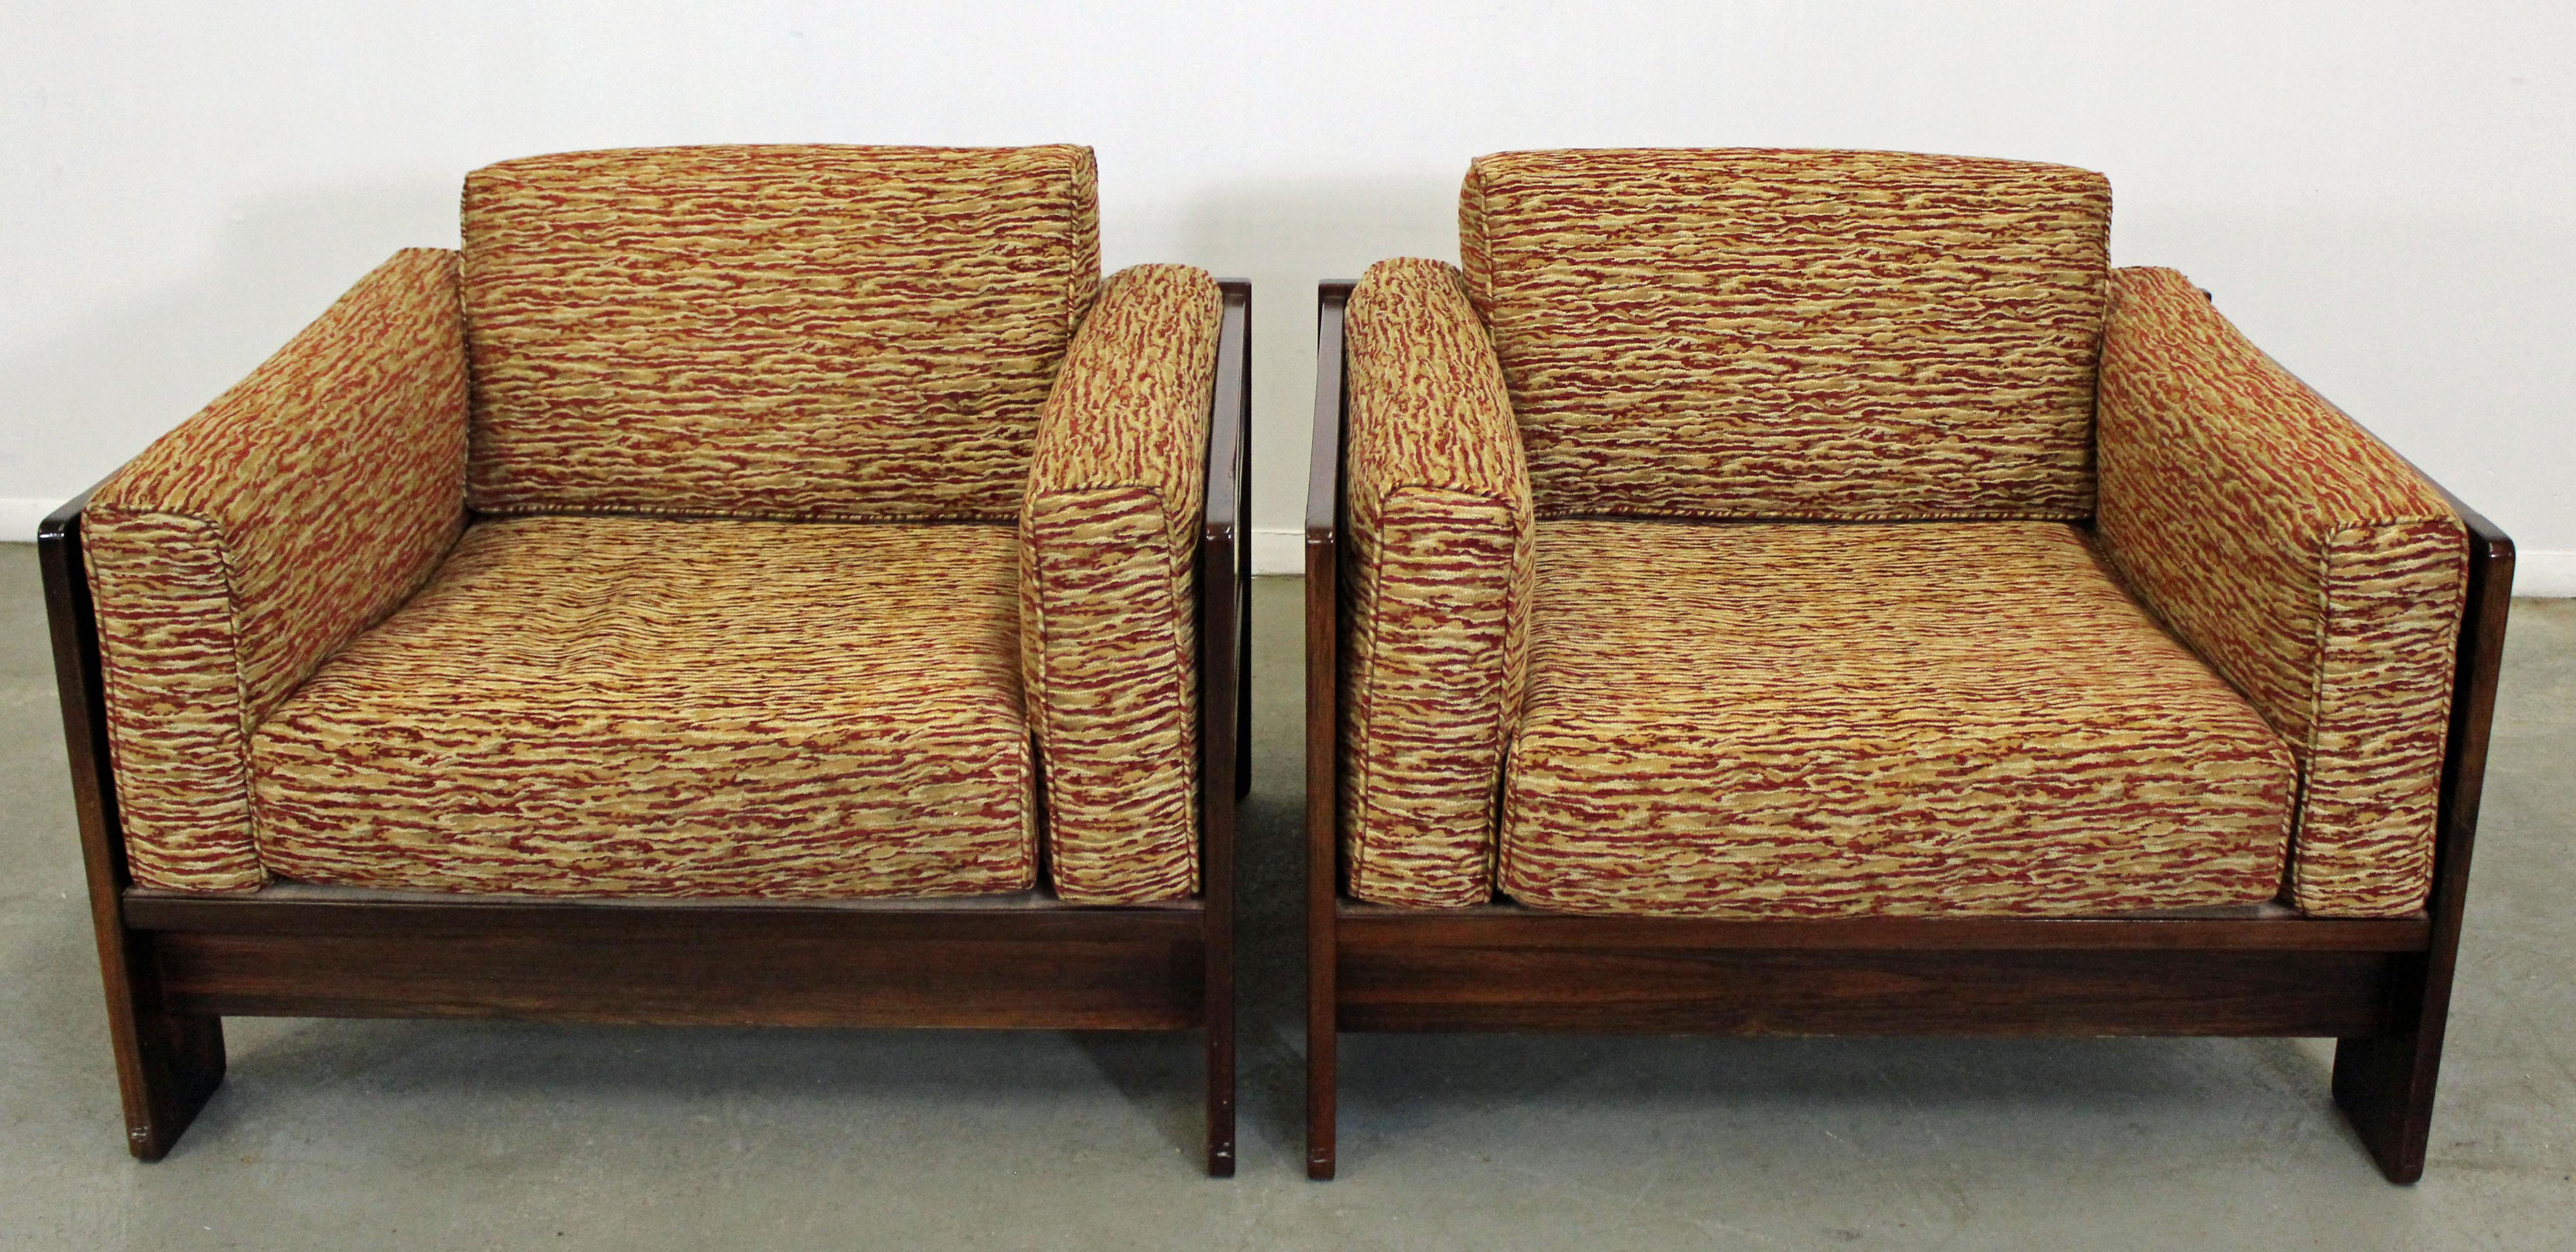 Offered is a Mid-Century Modern pair of 